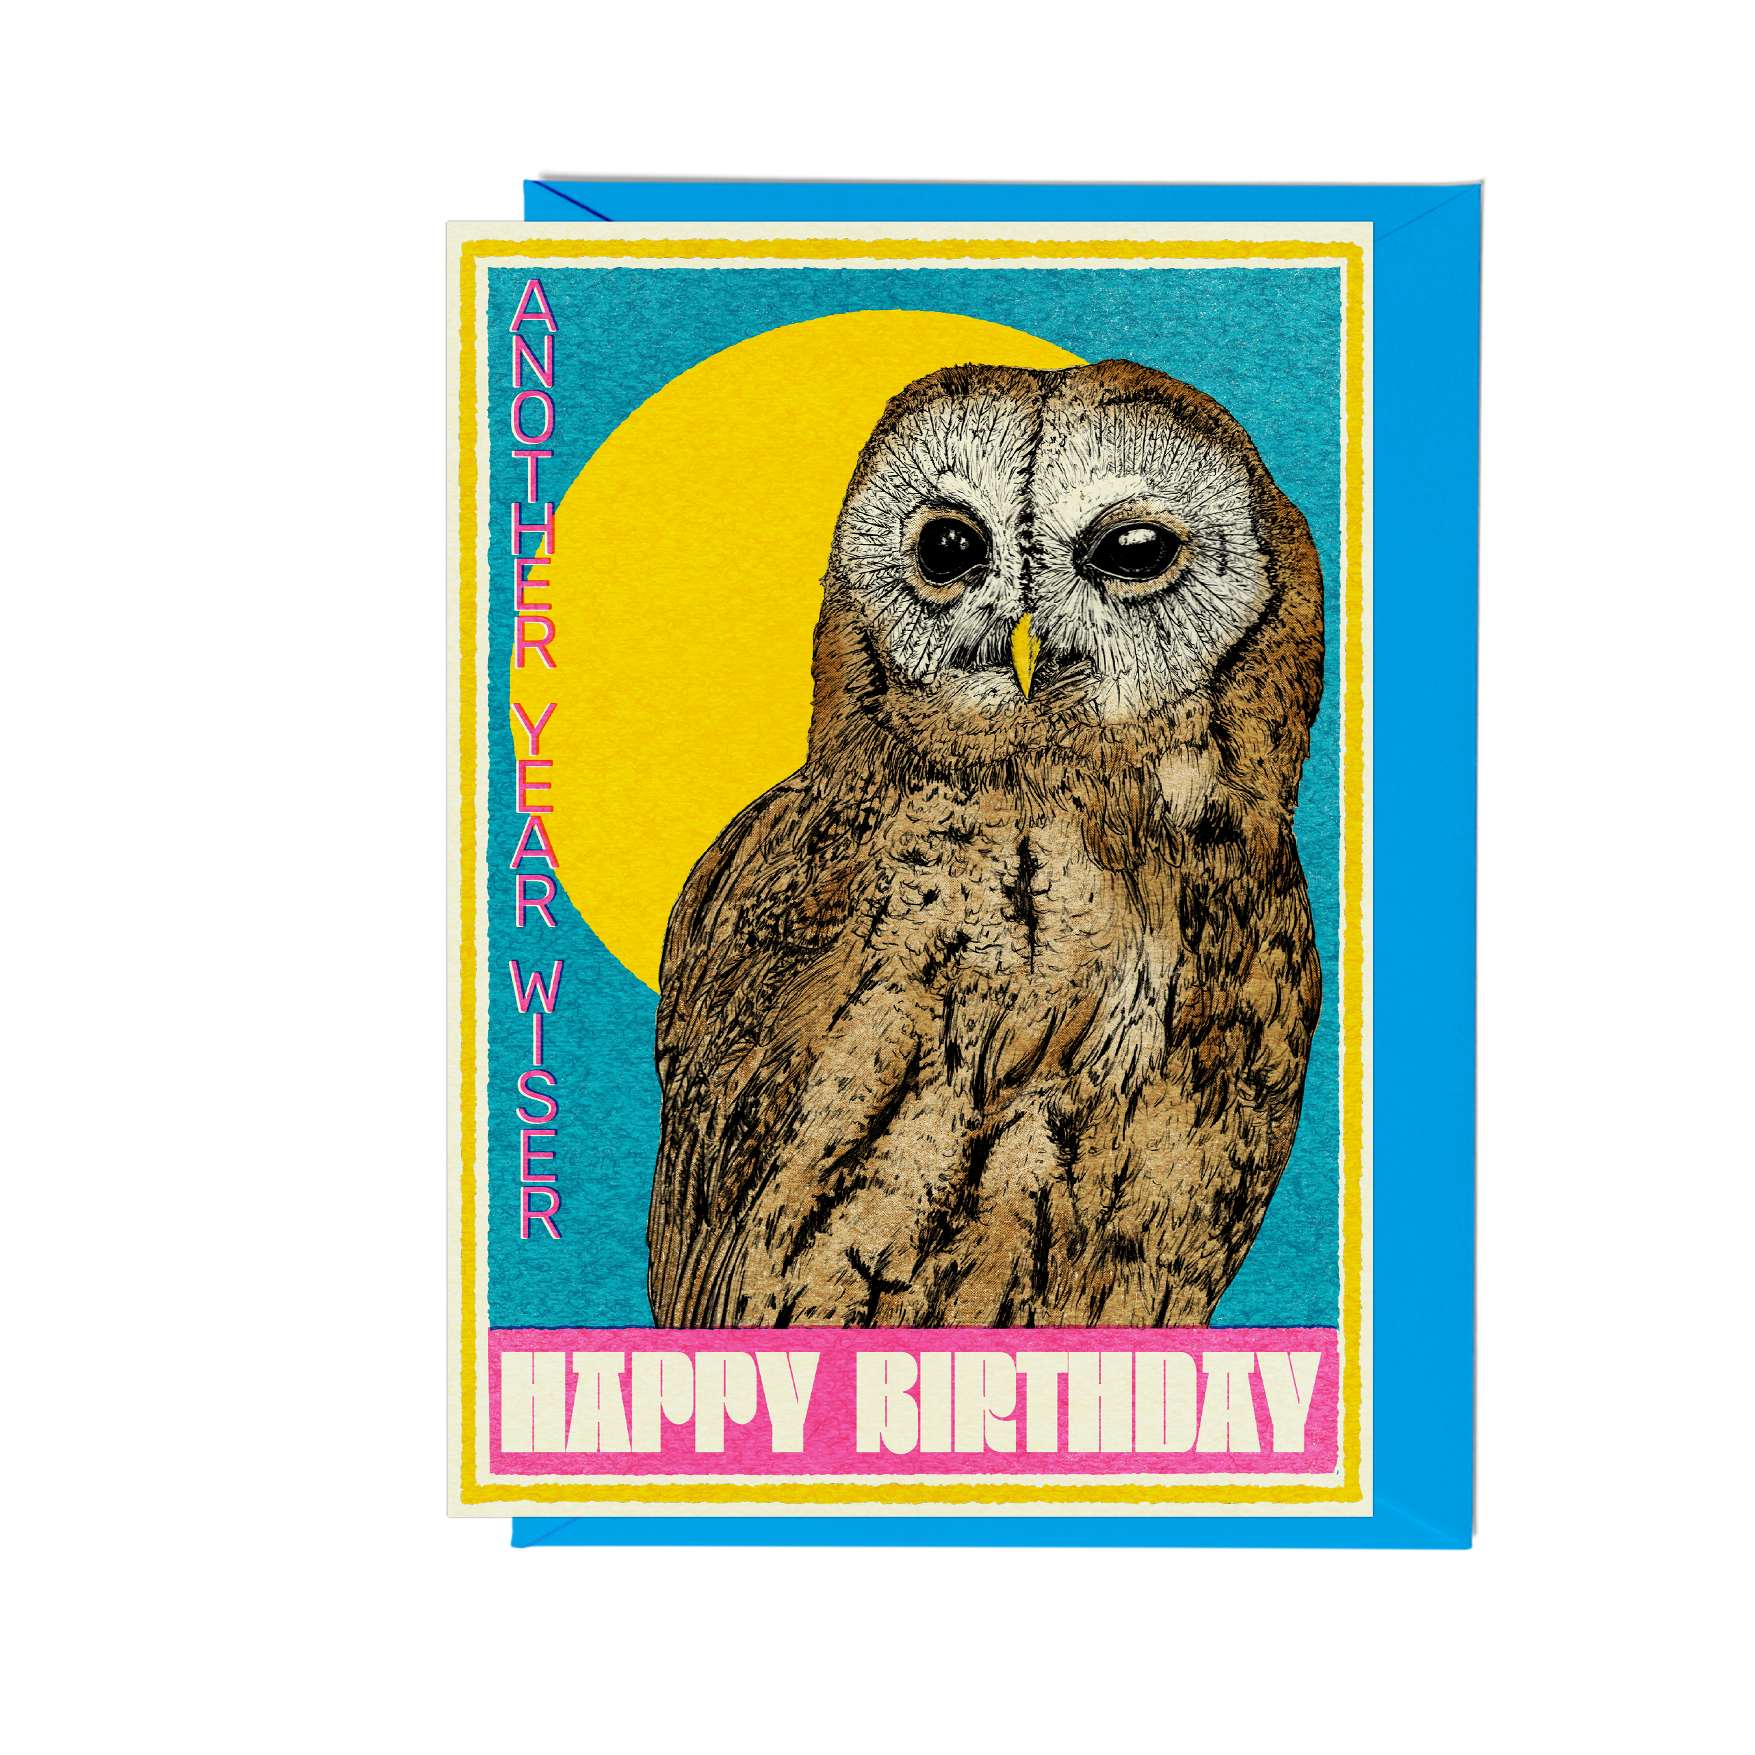 Another year wiser owl birthday card by fawn and thistle